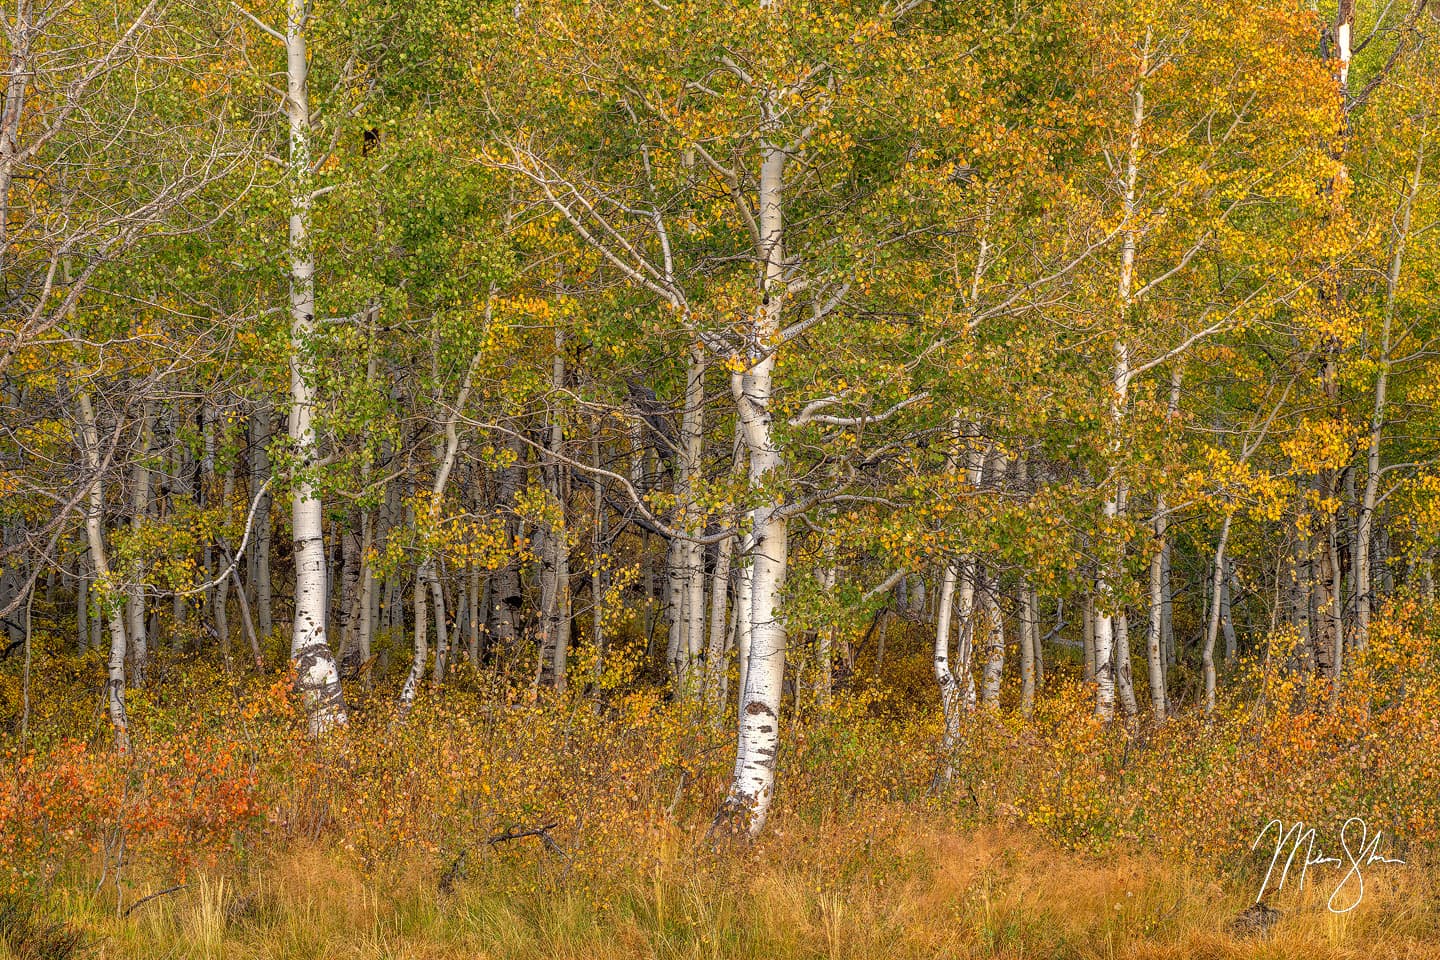 Autumn colors in the forest to the southeast of Guardsman Pass in Utah.